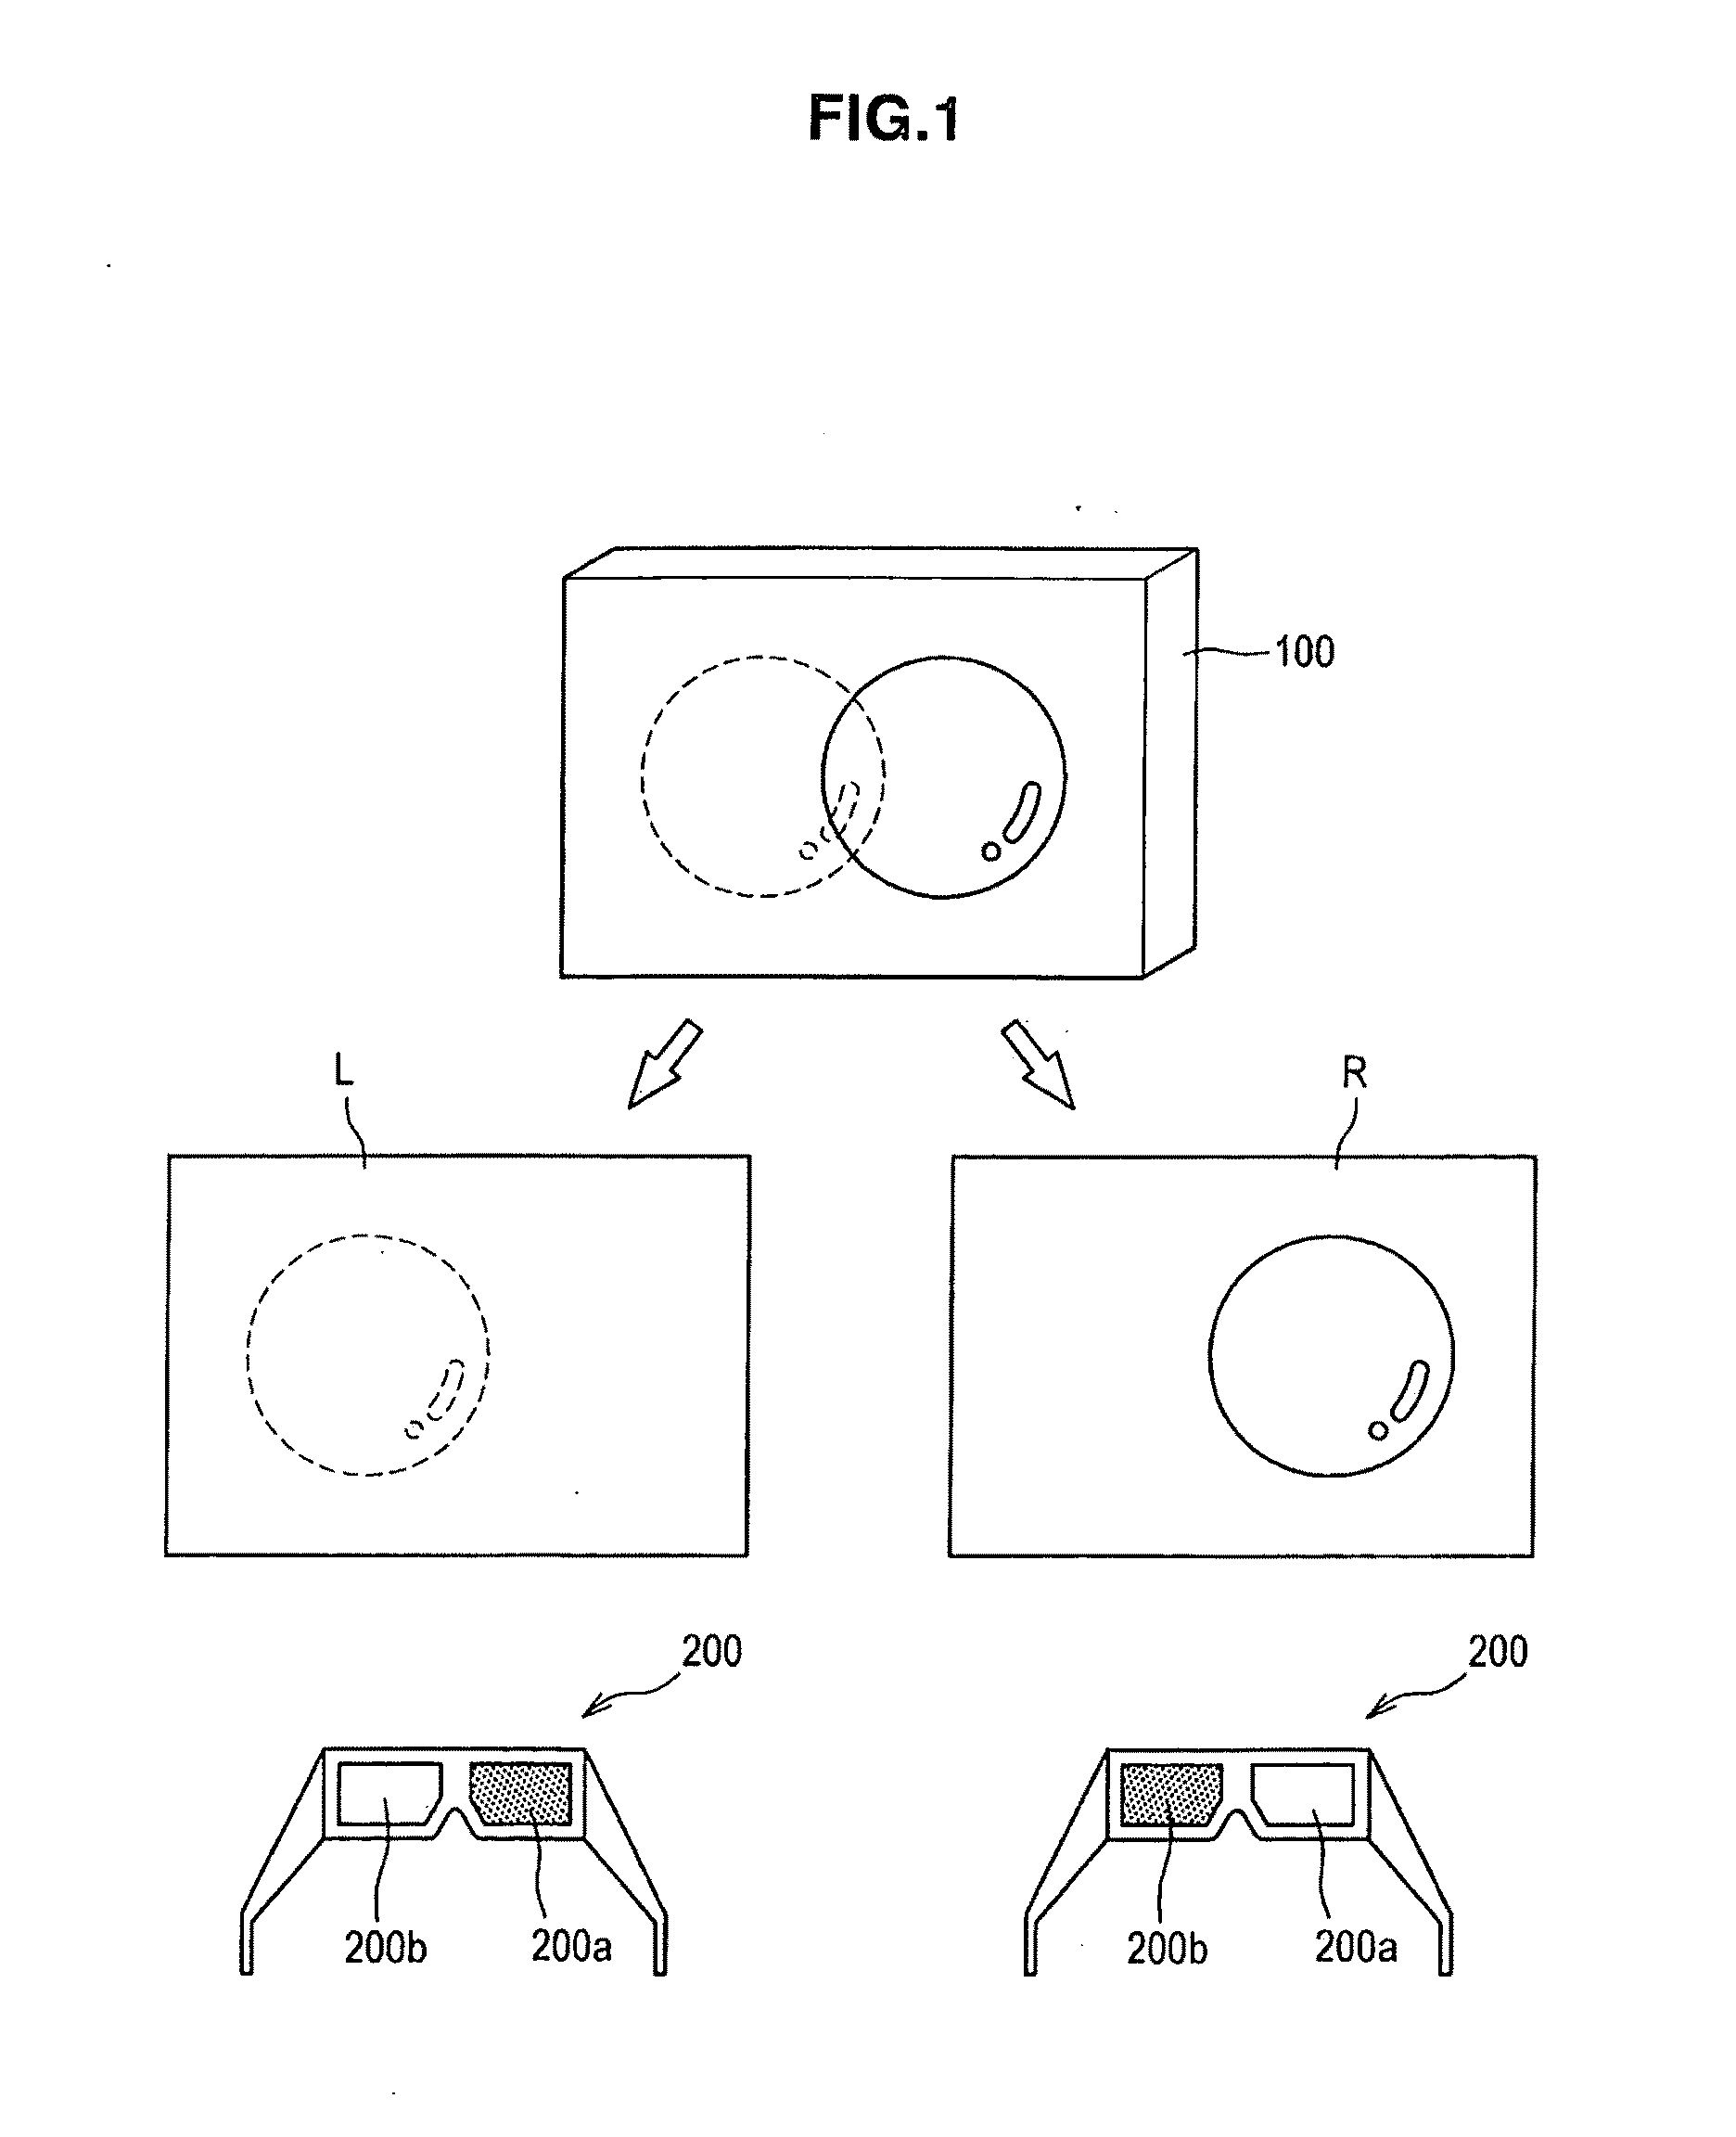 Image display apparatus, image display observation system, and image display method